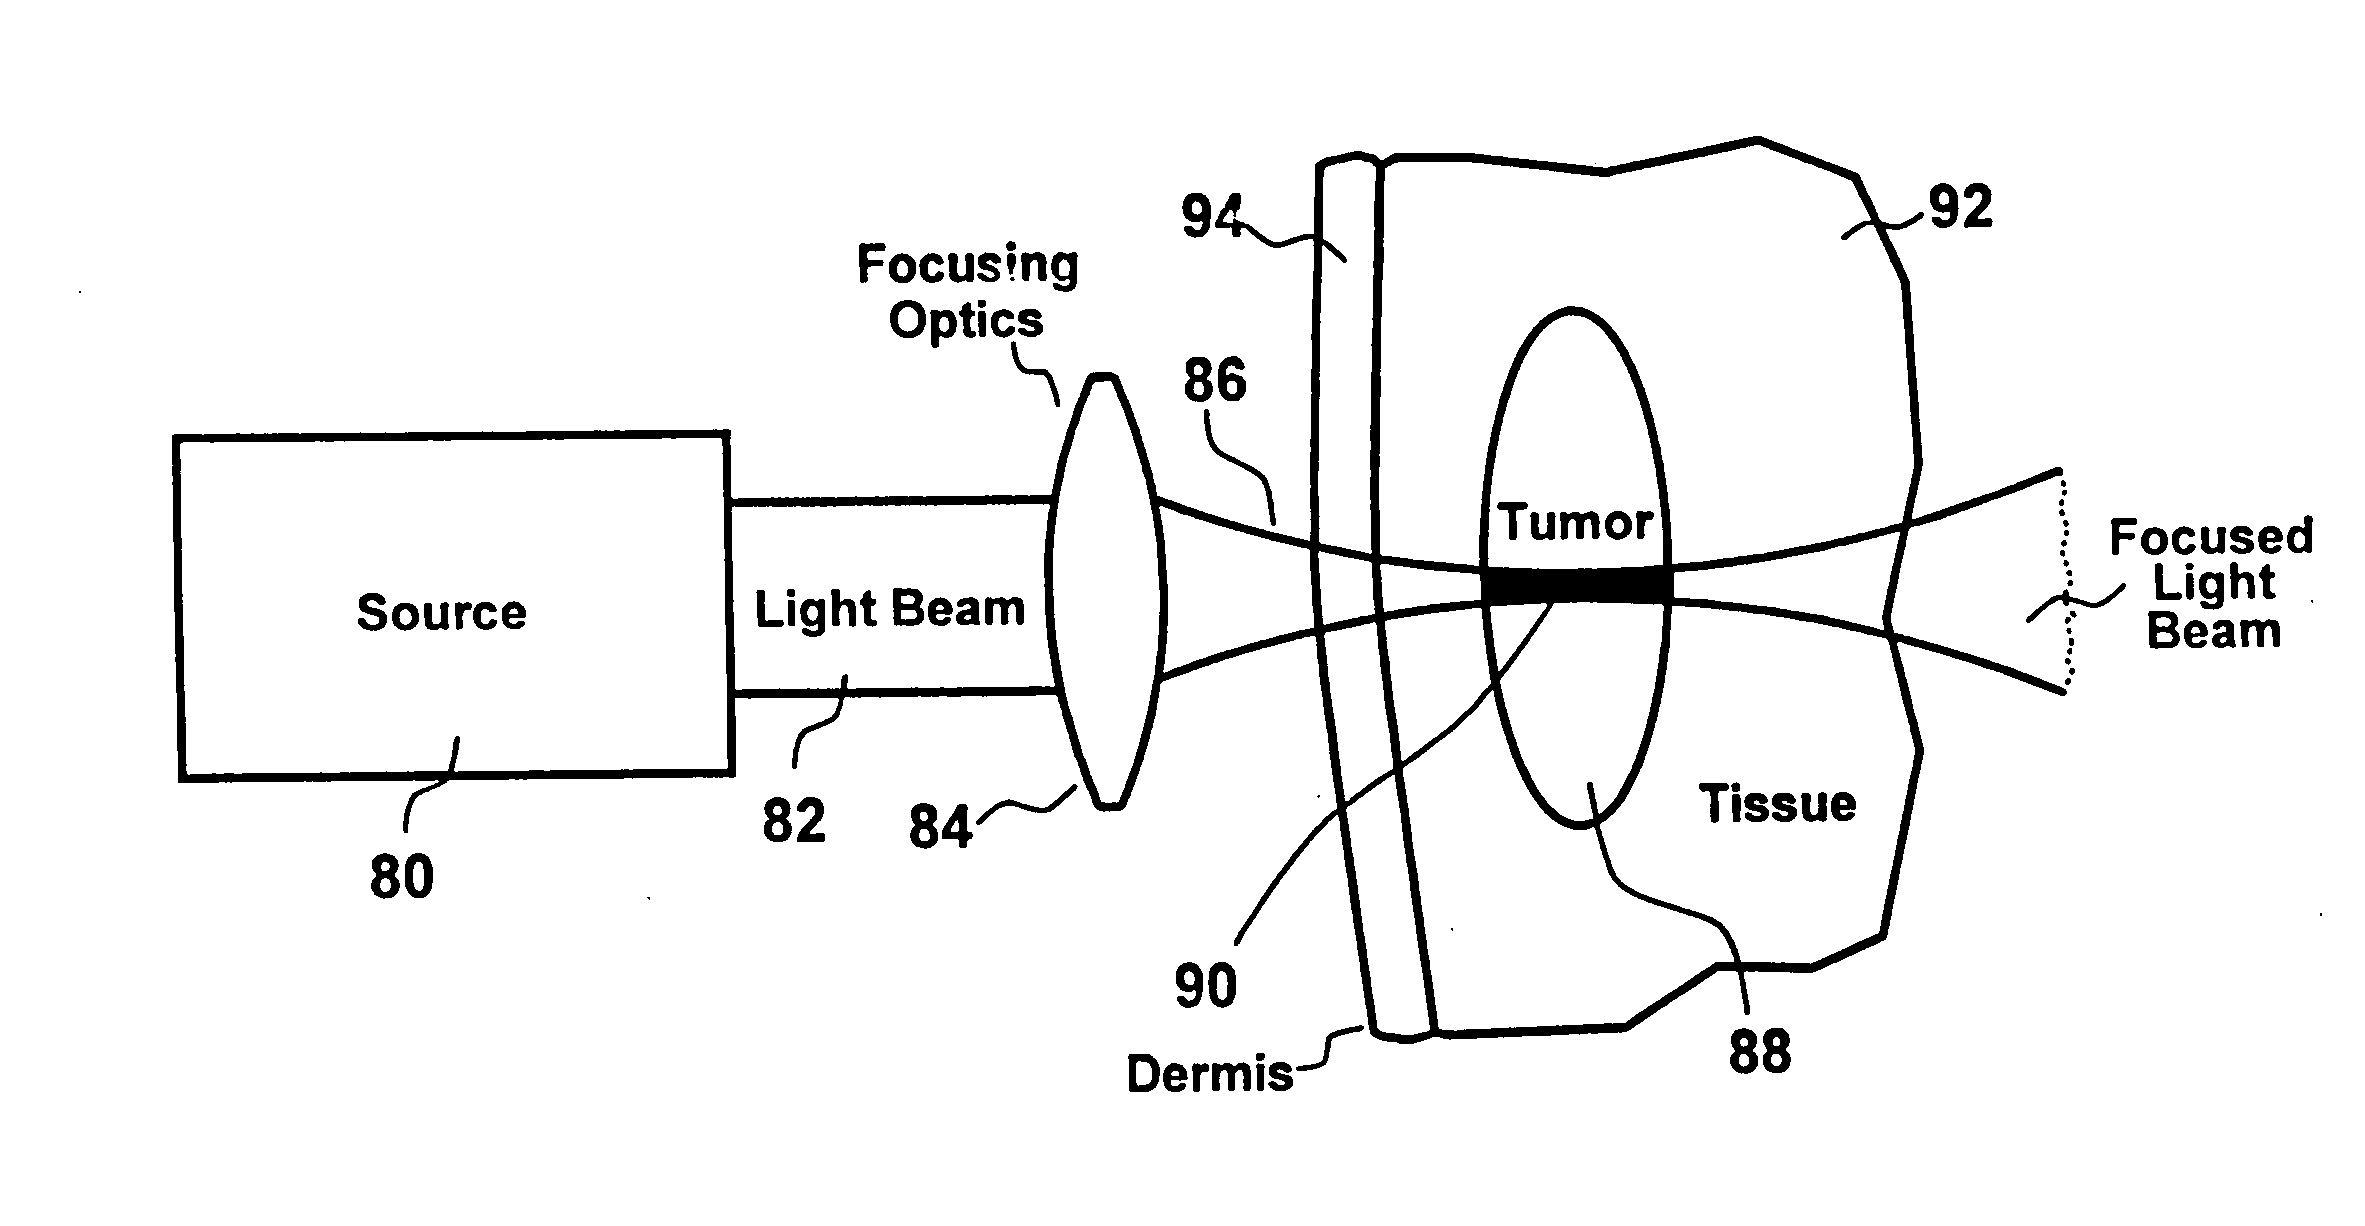 Treatment of pigmented tissue using optical energy